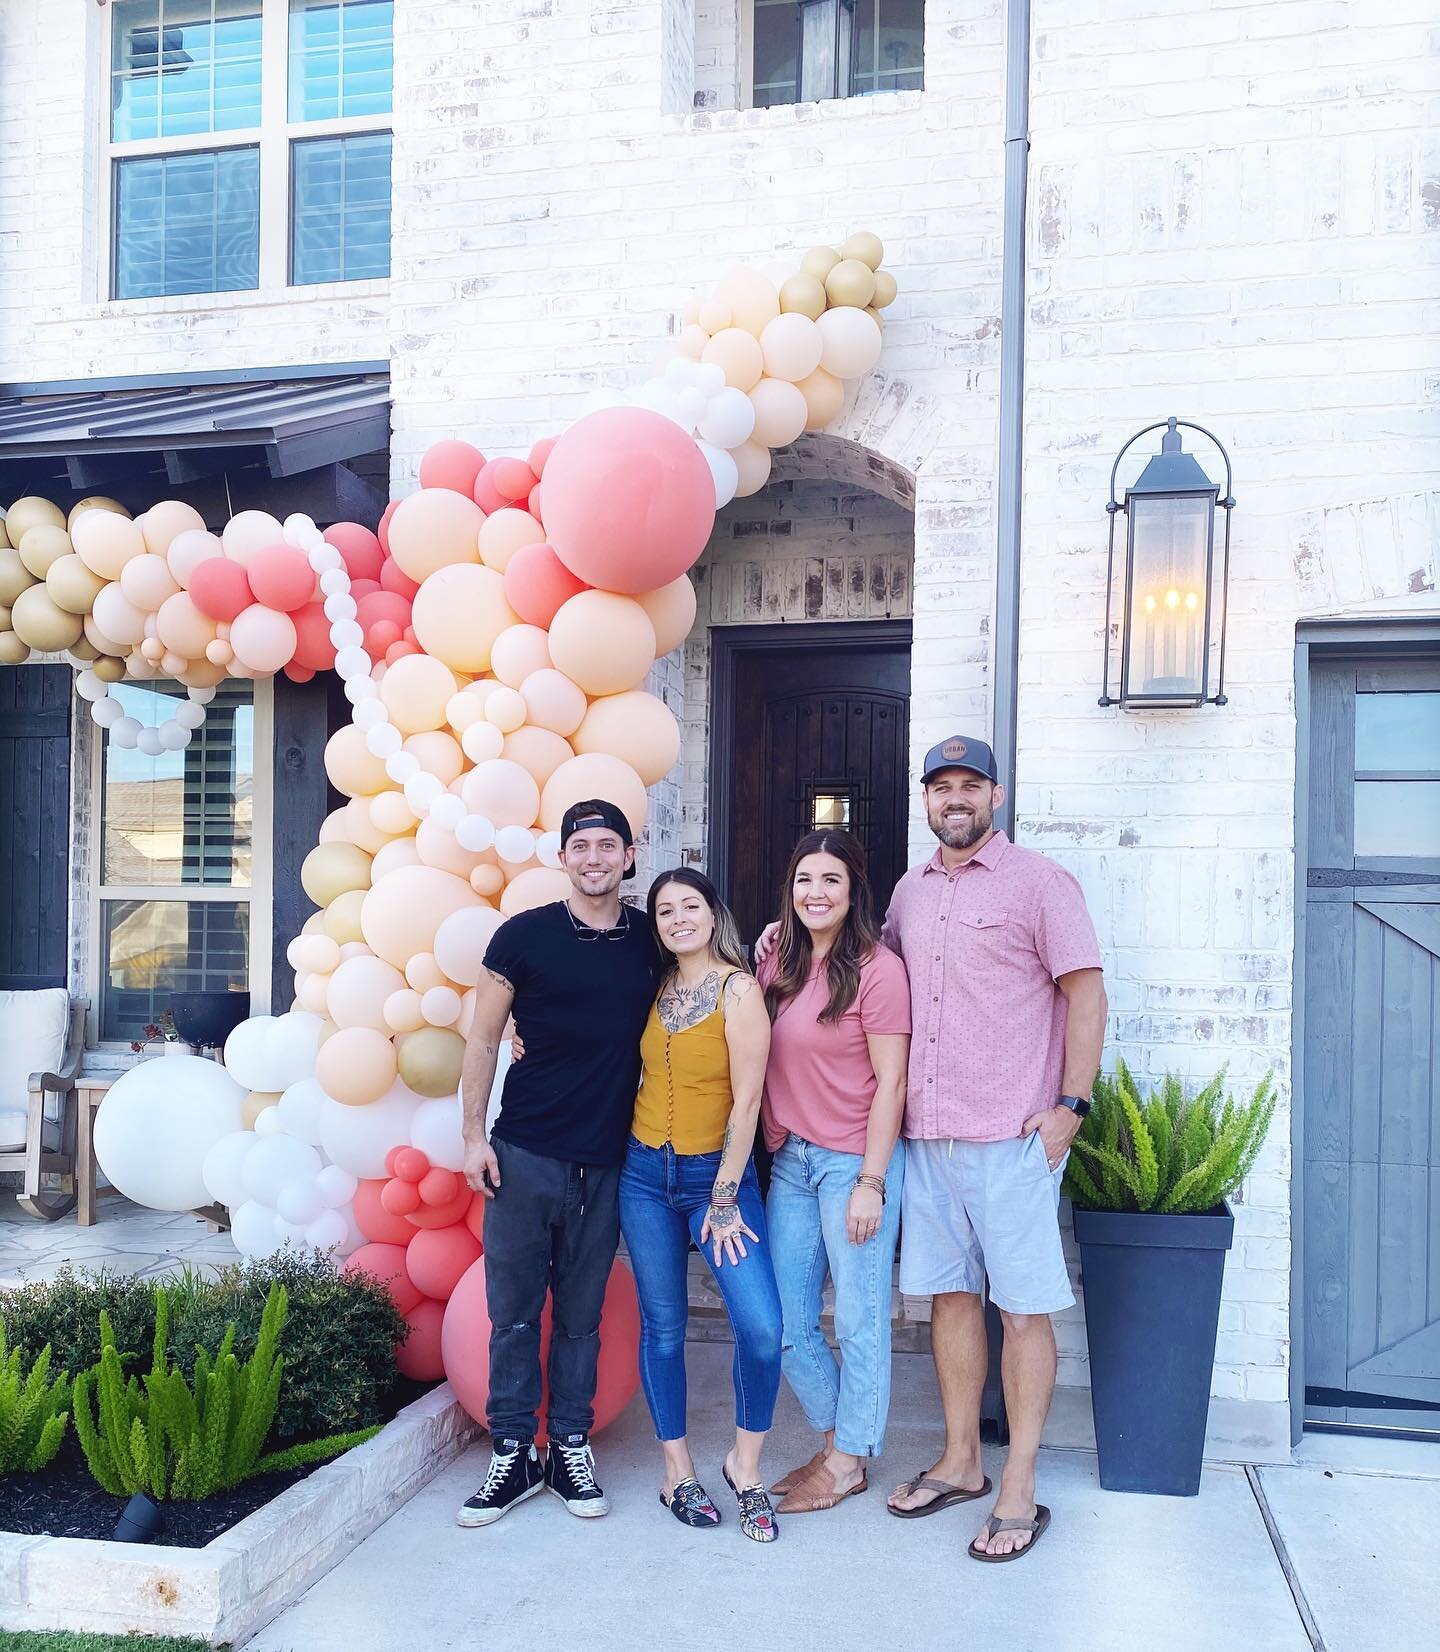 This weekend we bought a house! Well we officially own it as of this weekend 😉.
After closing, @ourfauxfarmhouse had us over and showed us the ropes. Omg you guys they are so sweet. They greeted us with the most beautiful balloon installation and 4 